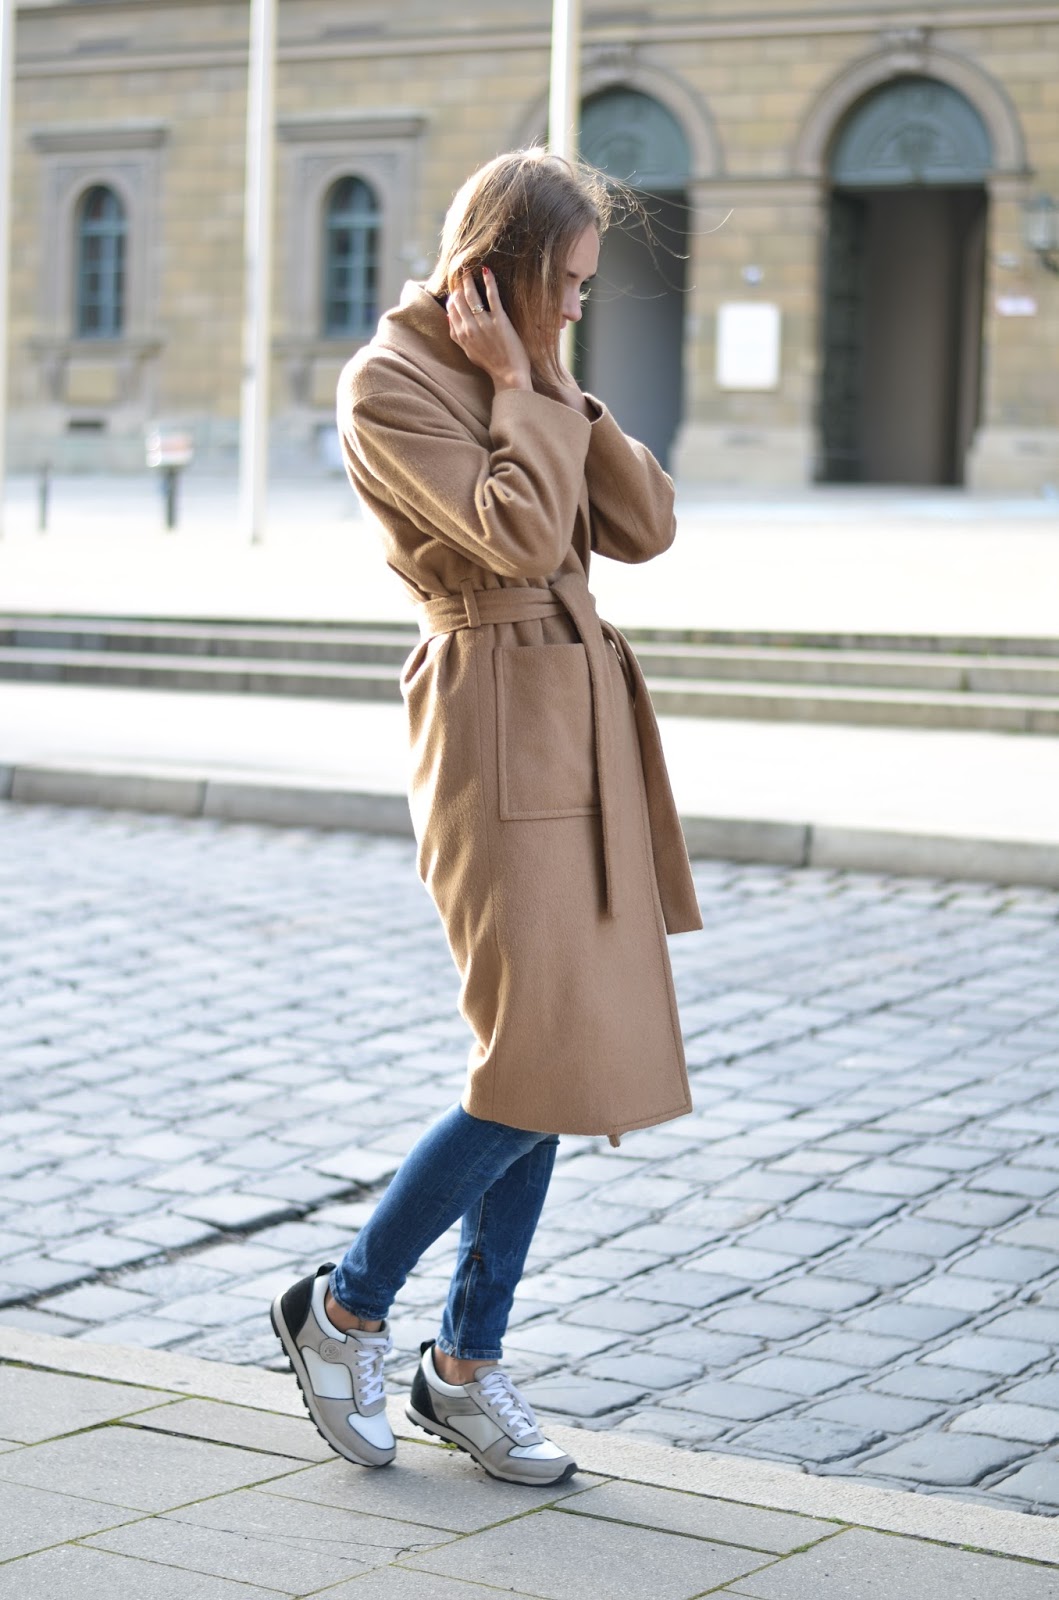 kristjaana mere minimalist camel coat outfit with sneakers